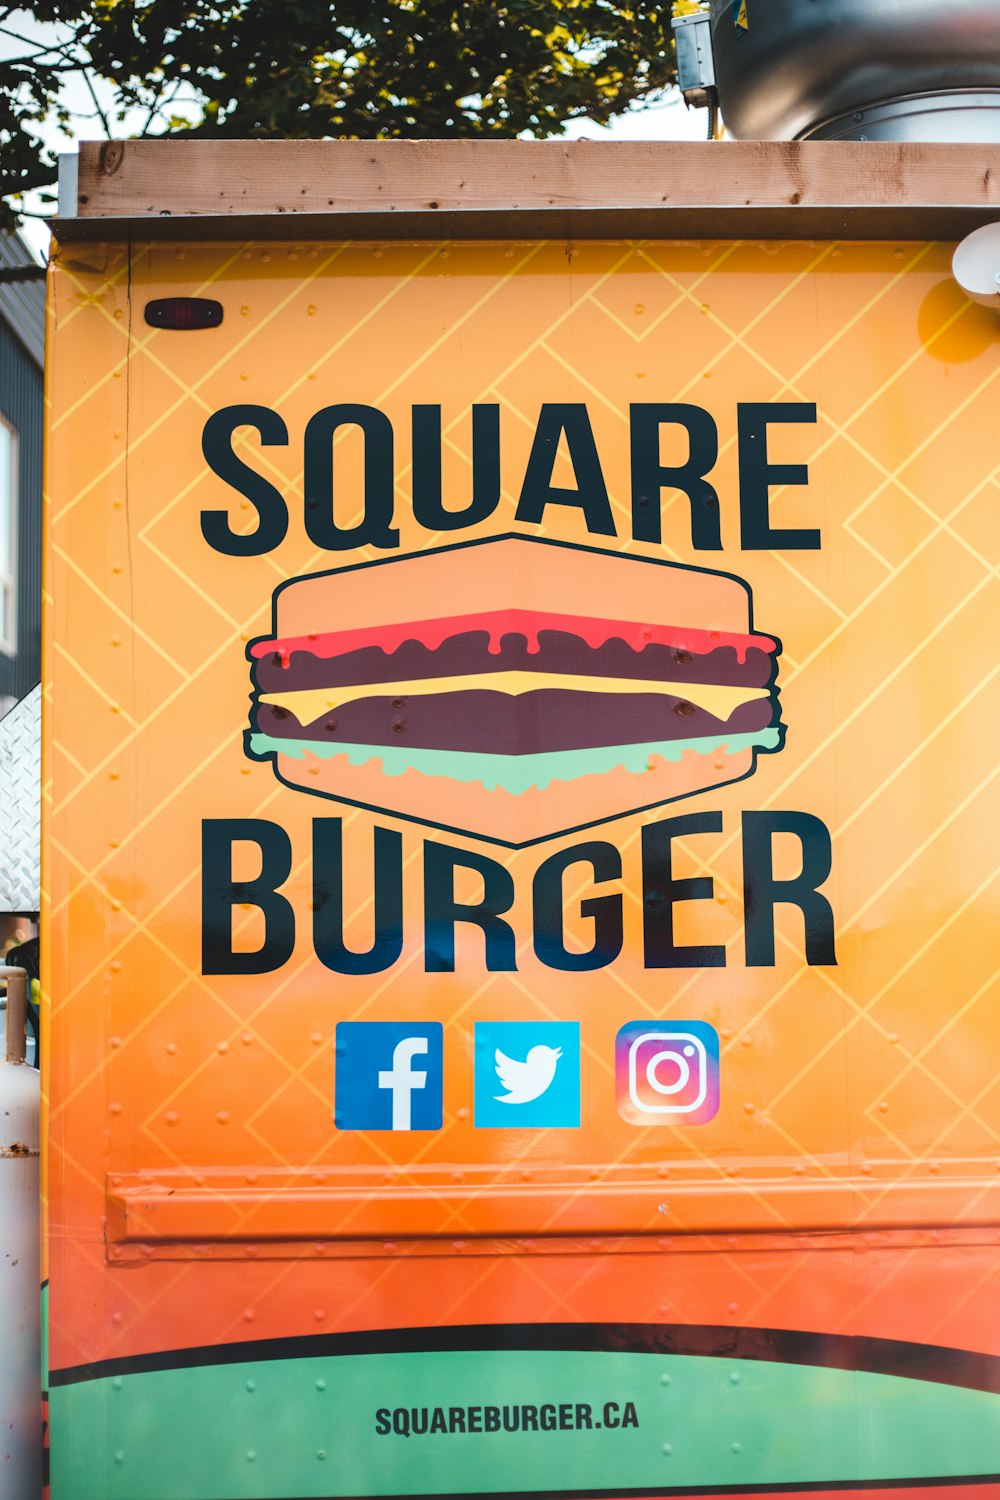 a sign for a restaurant called square burger